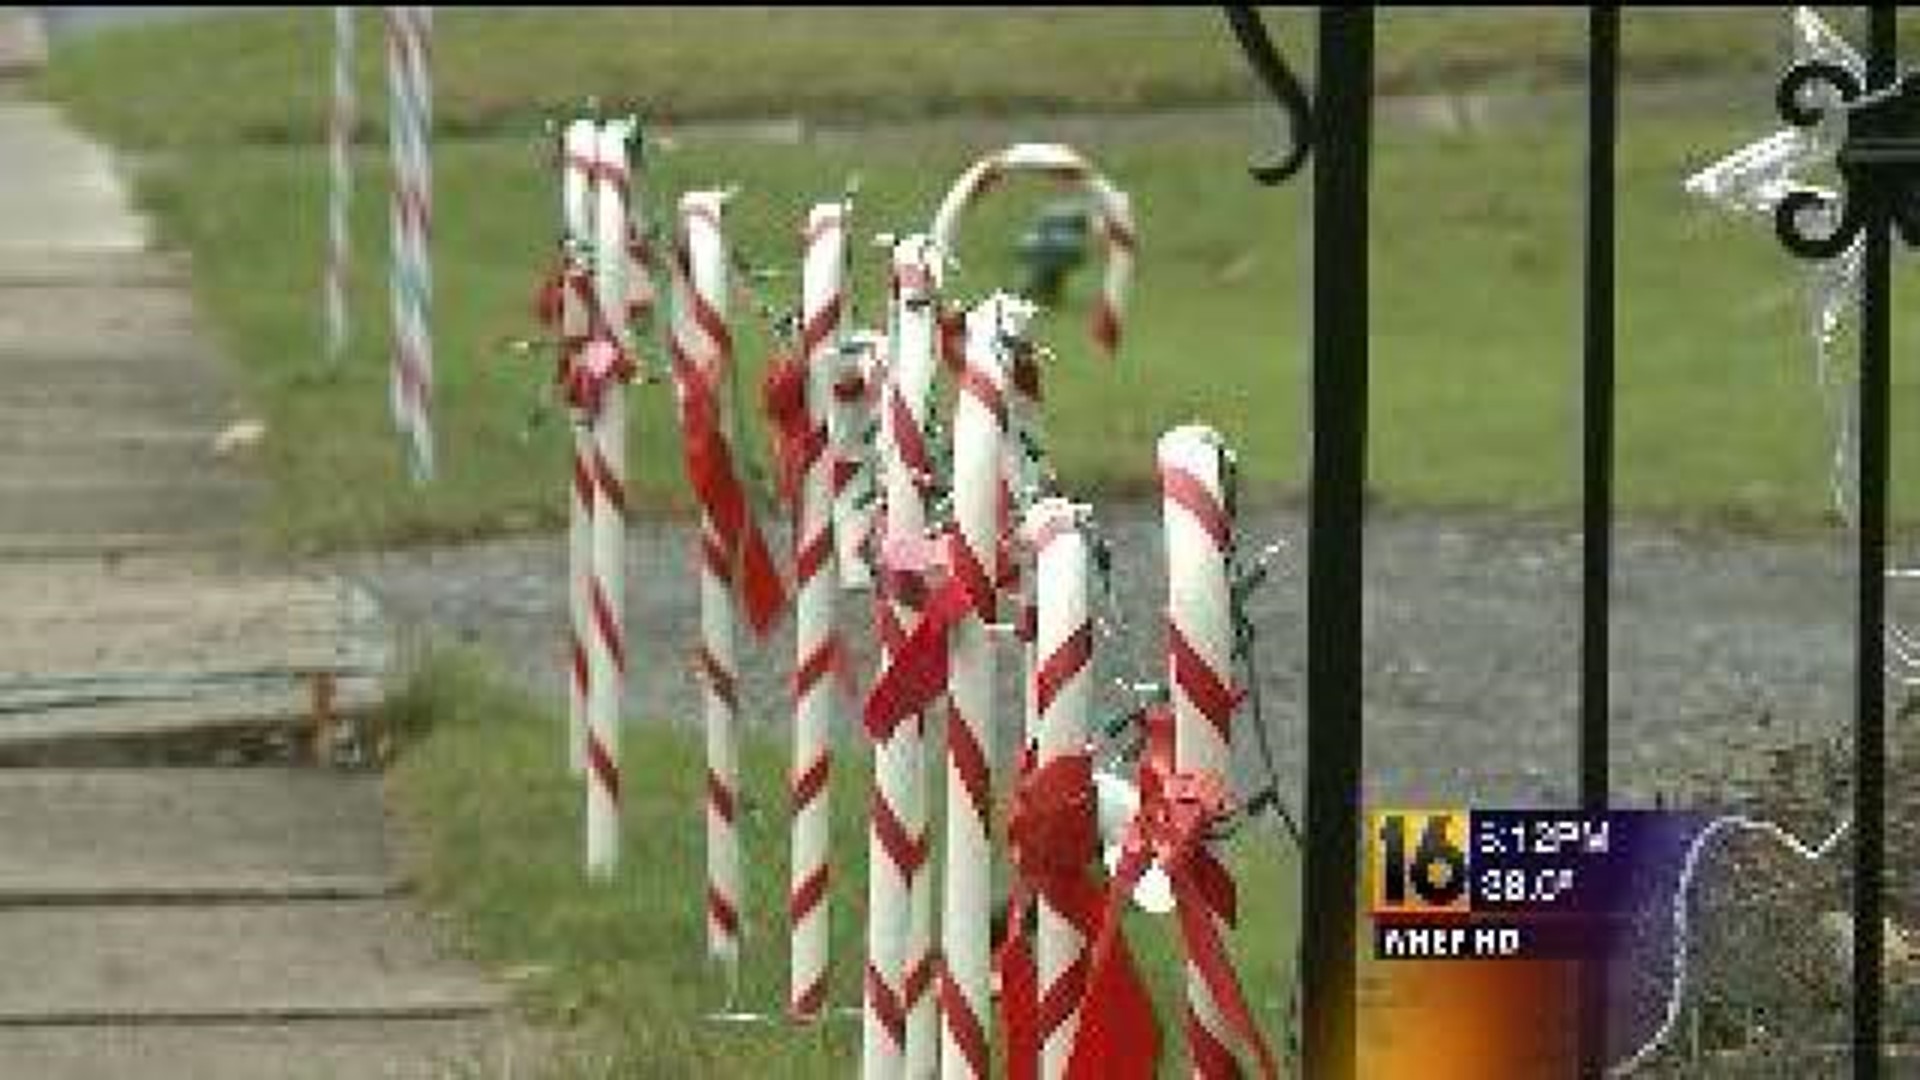 Remembering a Loved One on Candy Cane Lane